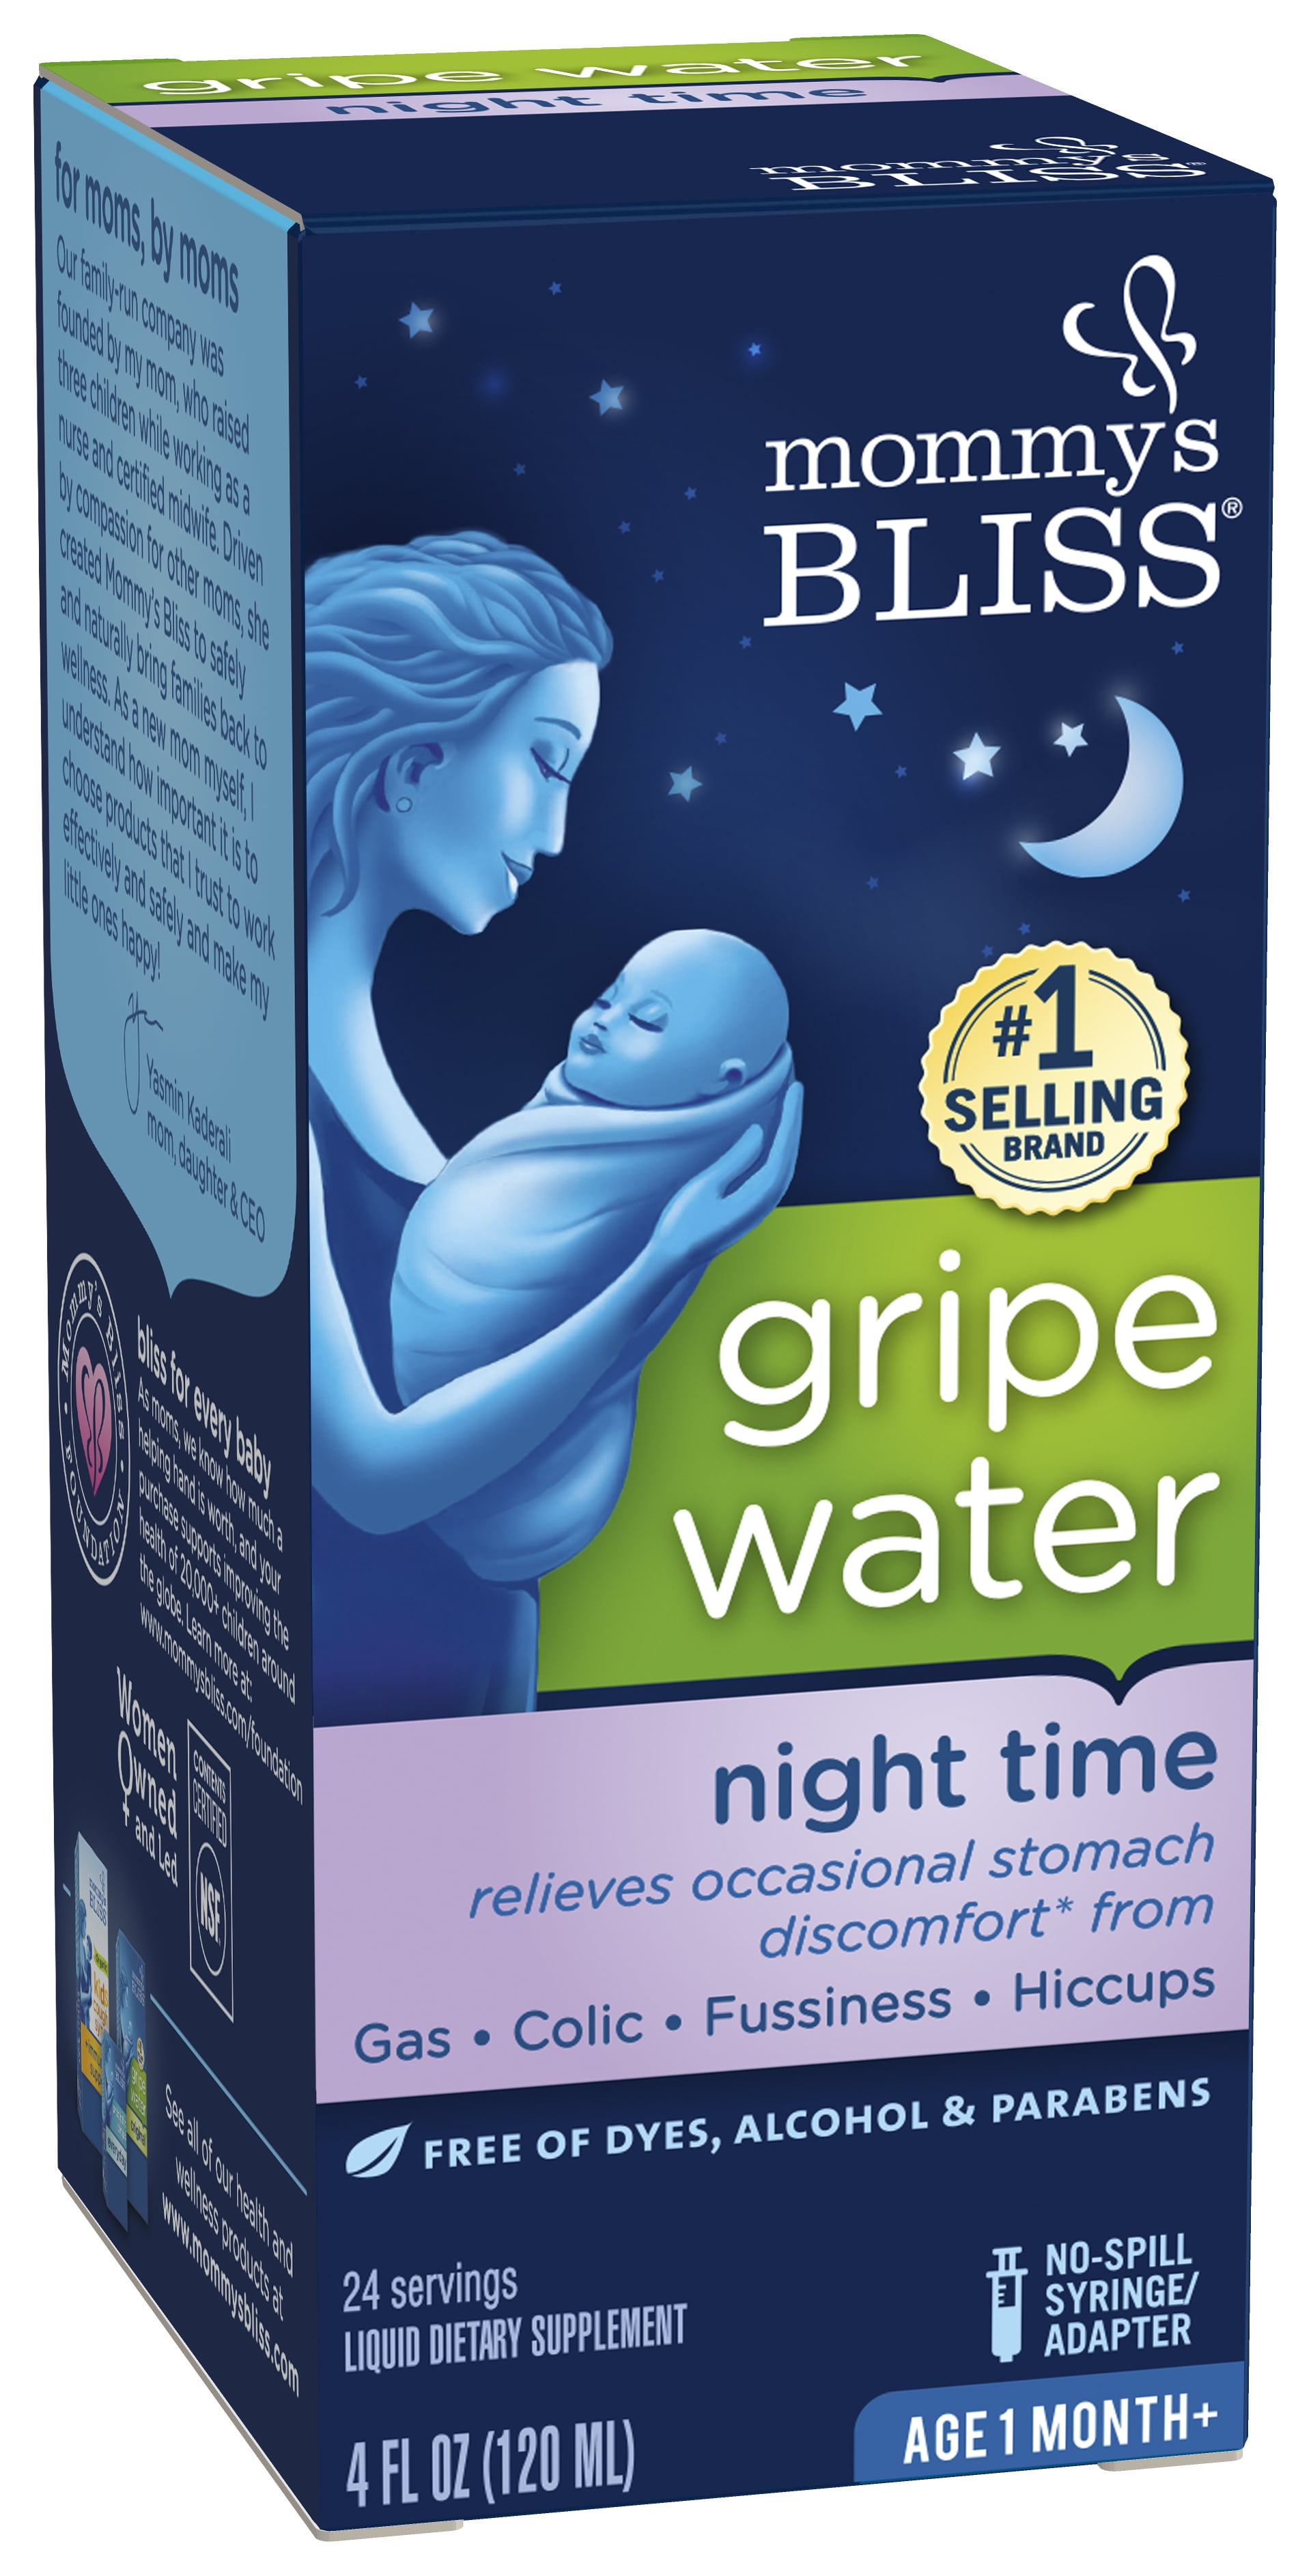 Mommys Bliss Gripe Water Night Time, Dietary Supplement, 1 Month+, 4 fl oz, 120 ml